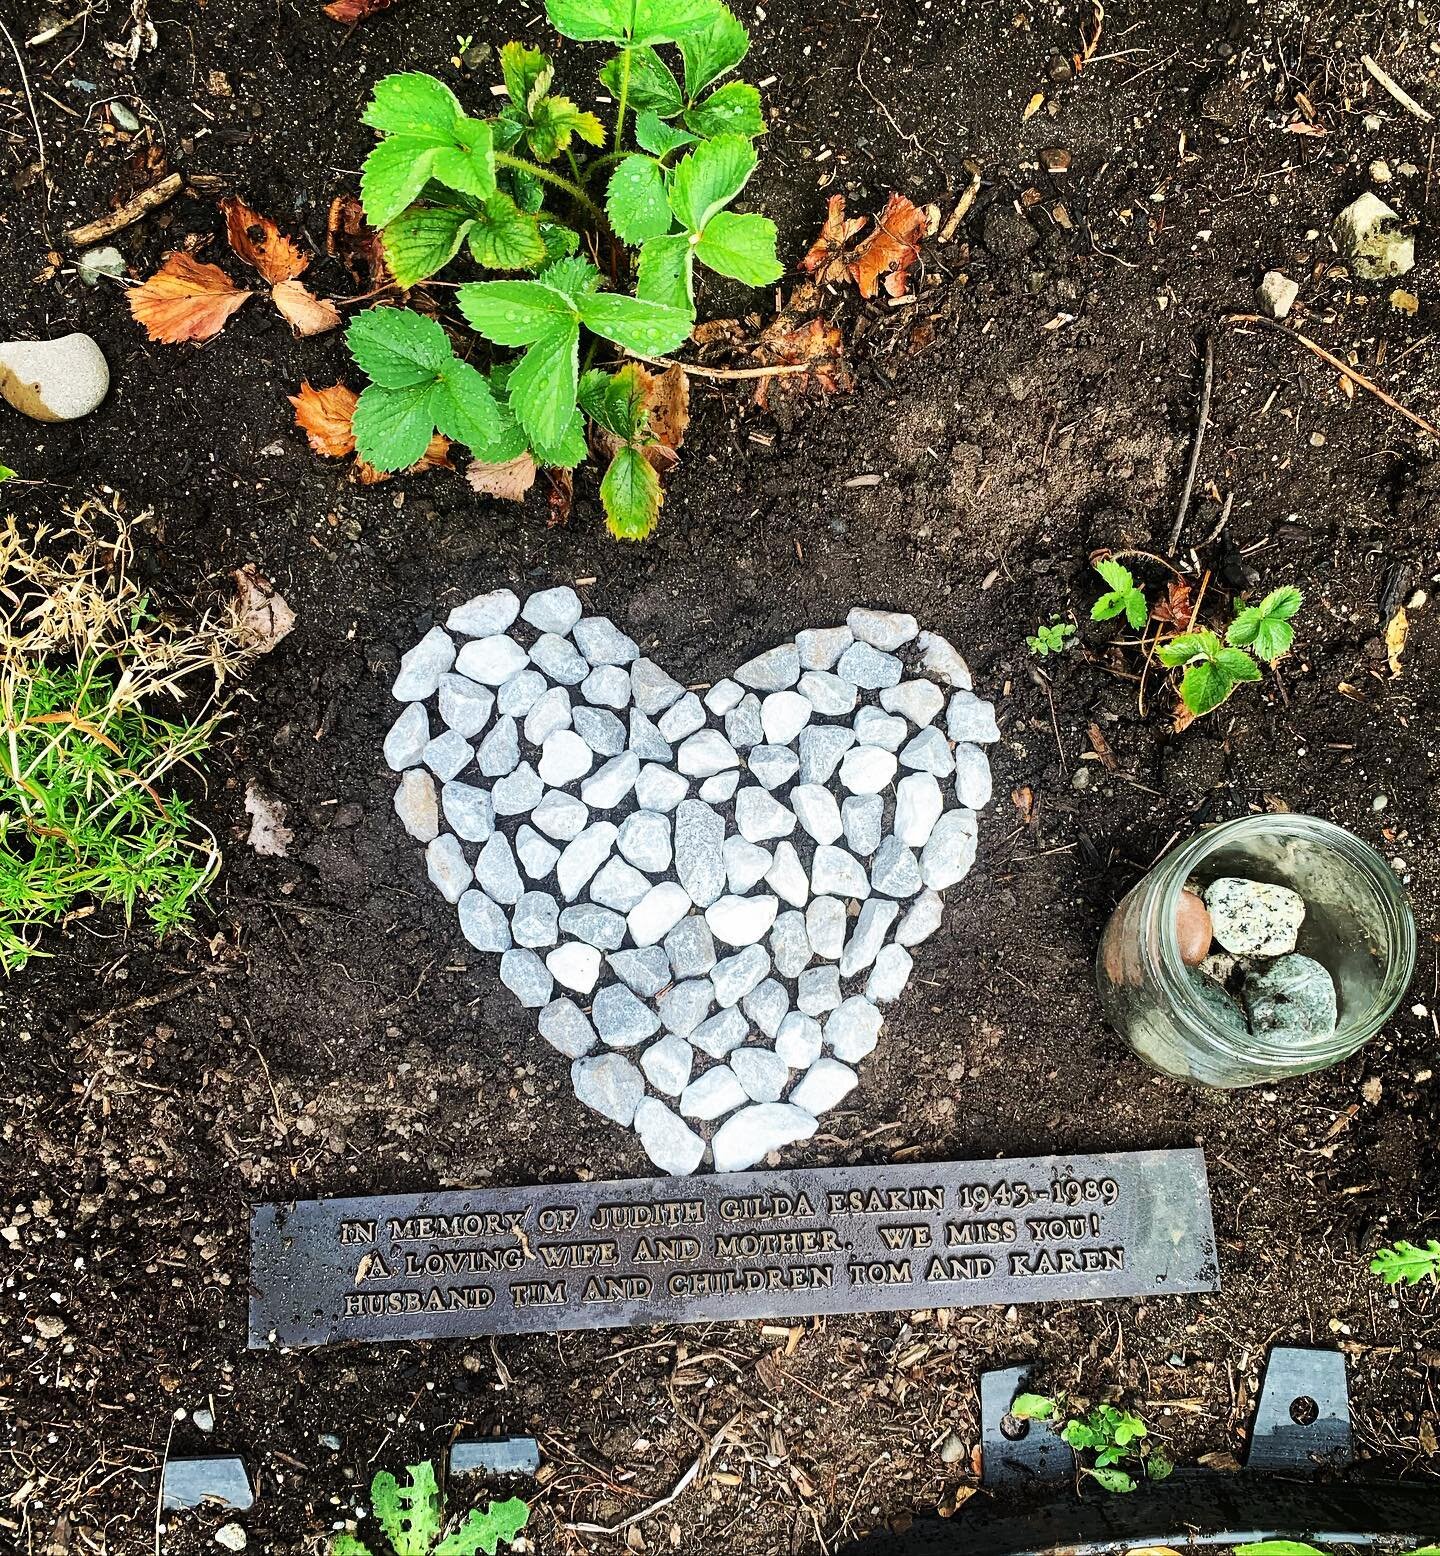 34 years ago today, my beautiful, determined, inspiring, thoughtful and compassionate mother died.  Last month, I placed a memorial plaque my father had made for a bench in English Bay many years ago in my garden without mentioning it to my family.  